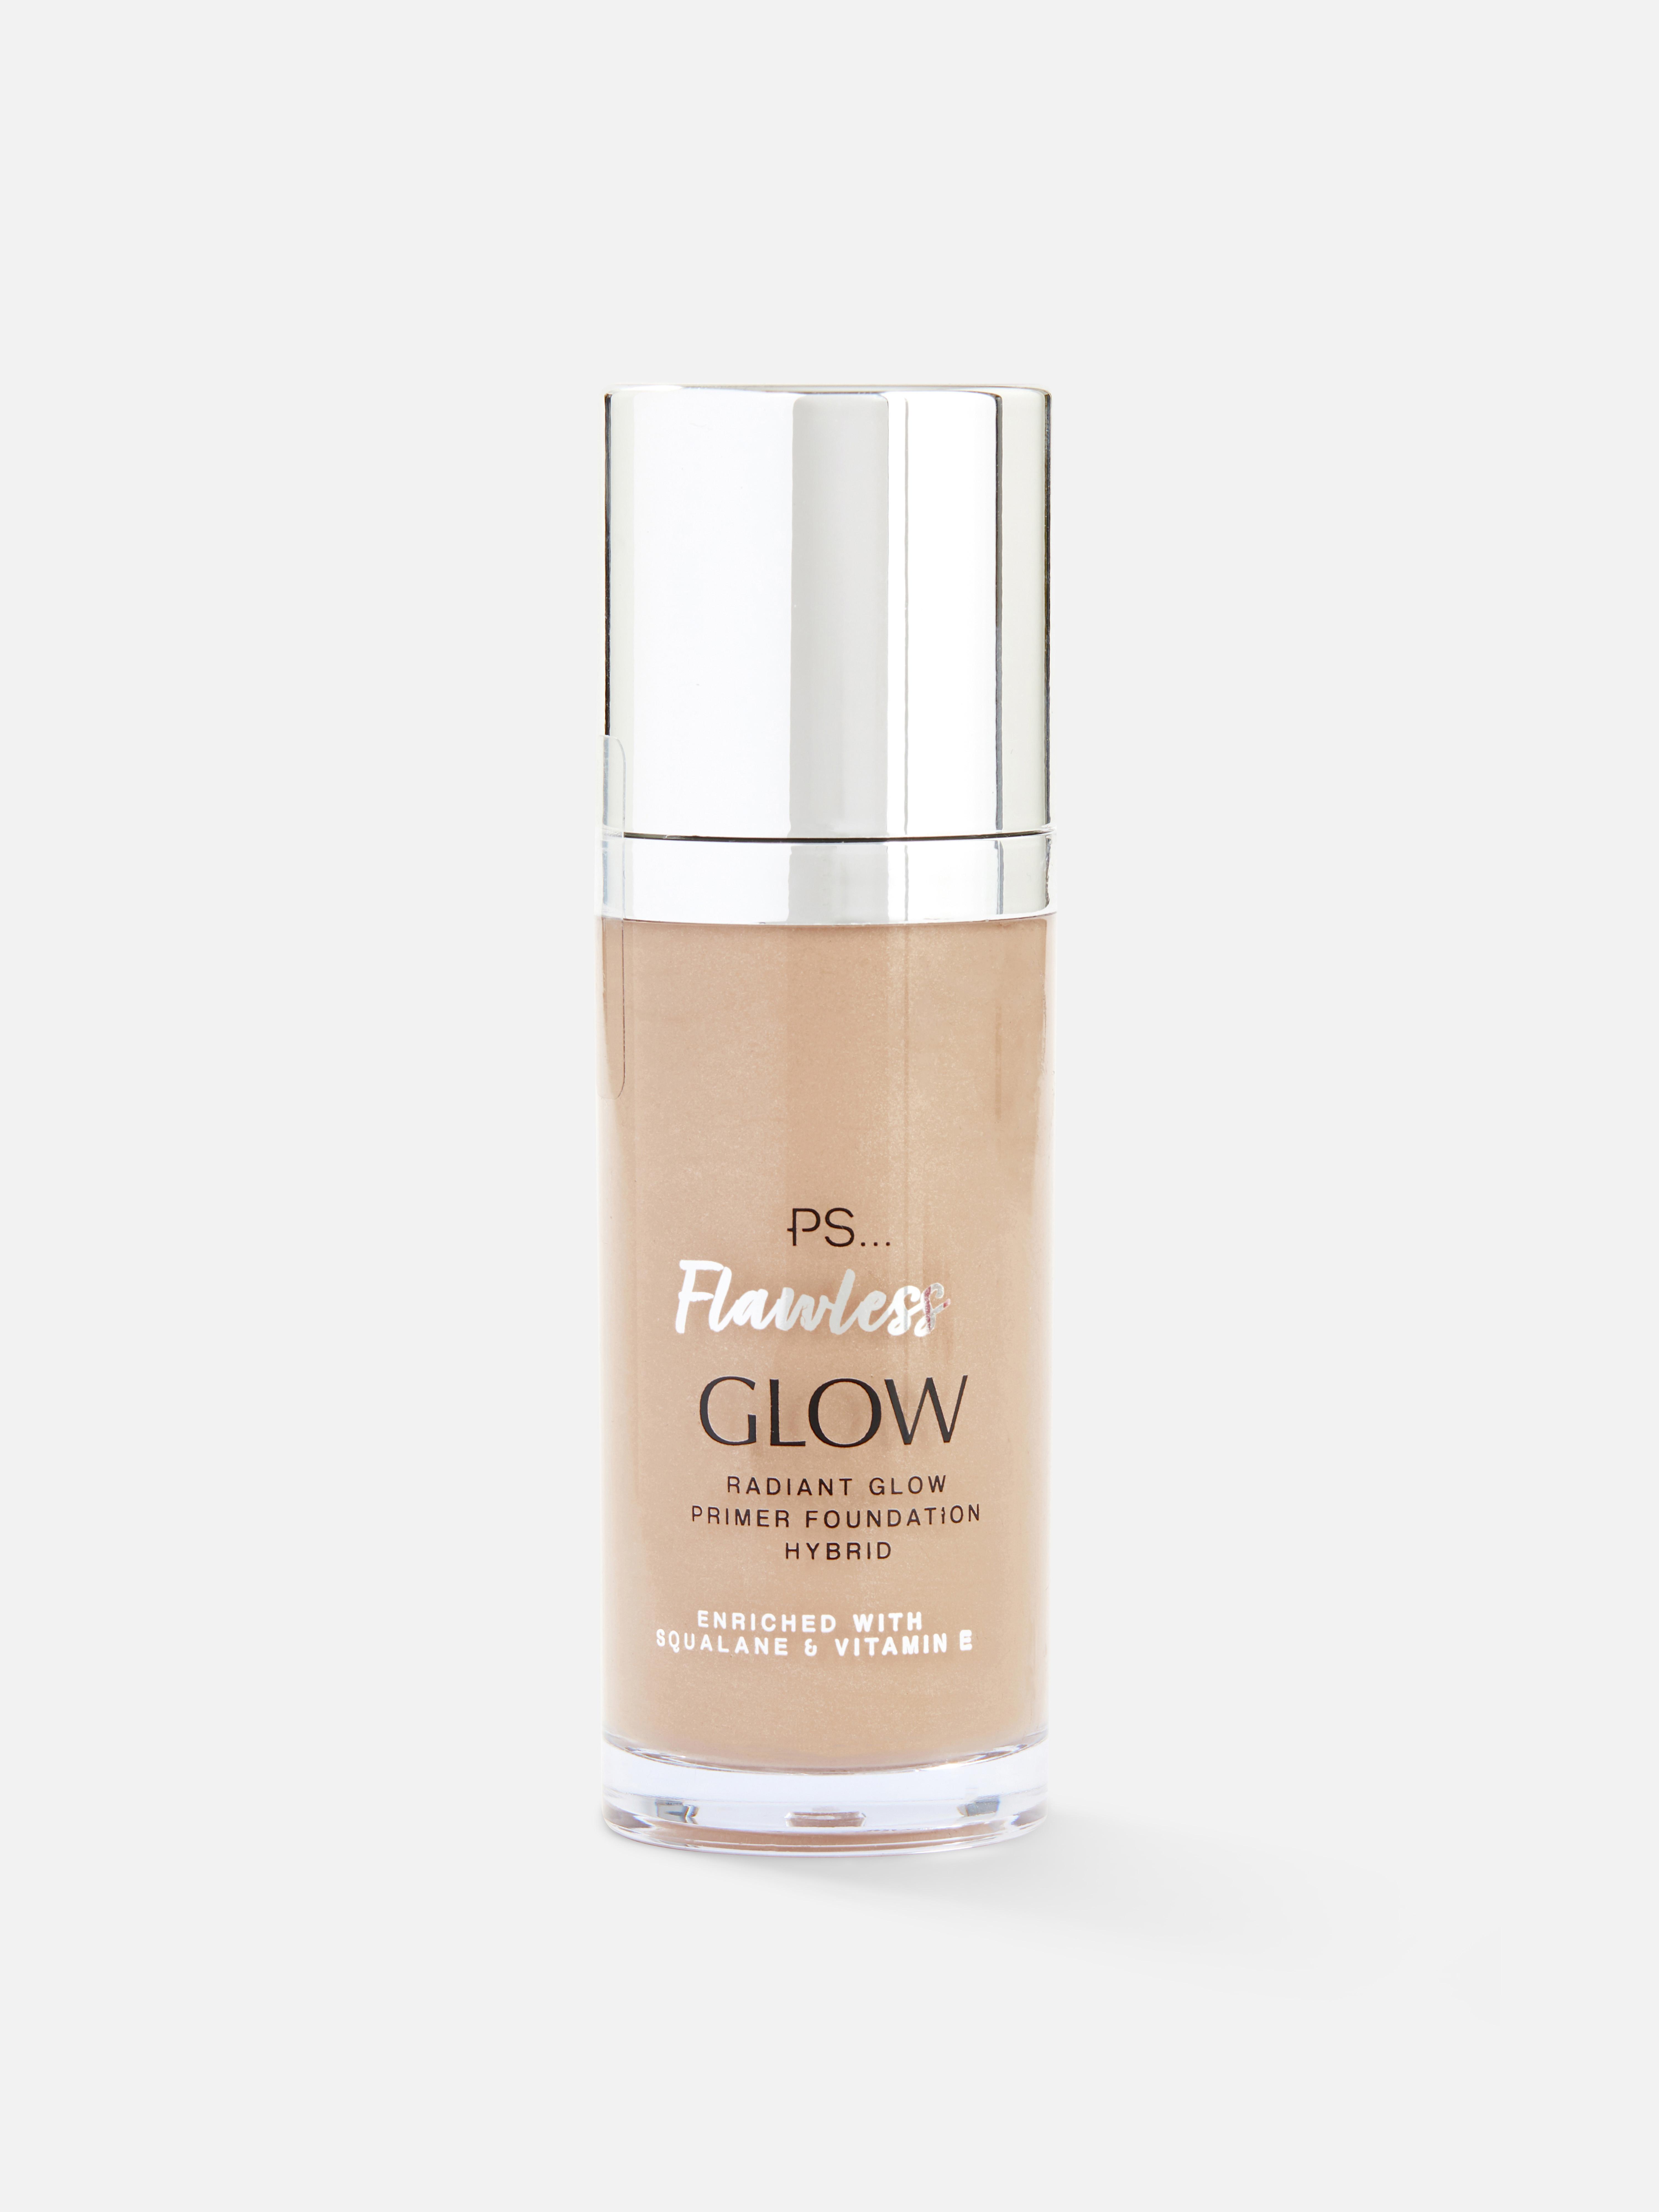 PS... Flawless Glow Radiant Primer Foundation